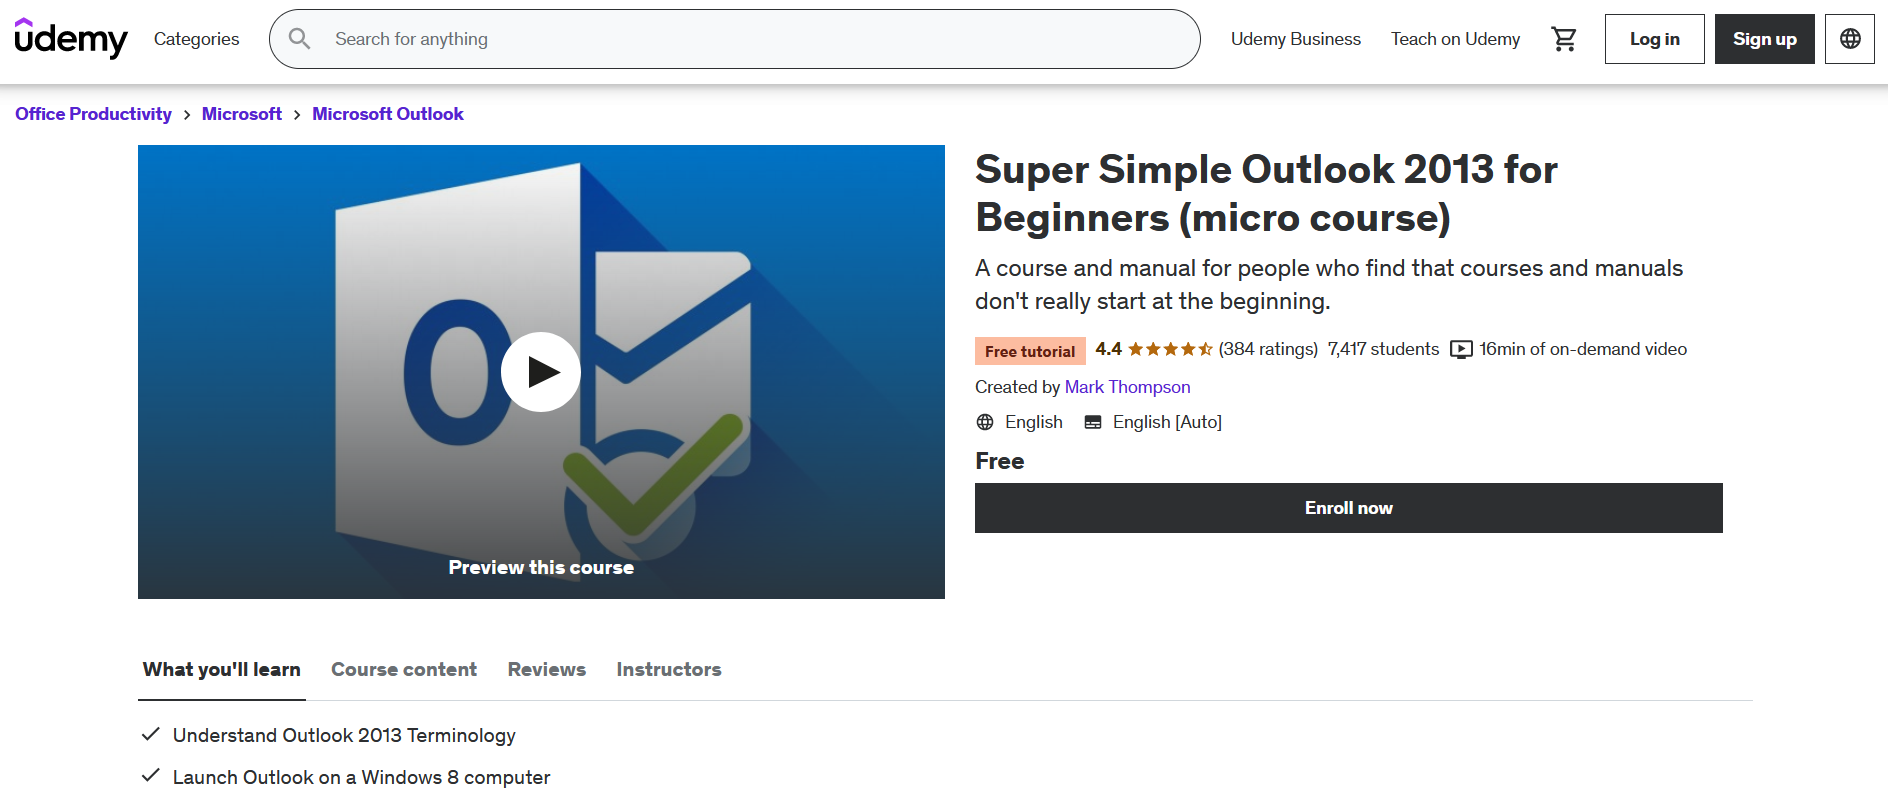 Super Simple Outlook 2013 for Beginners (micro course) via Udemy